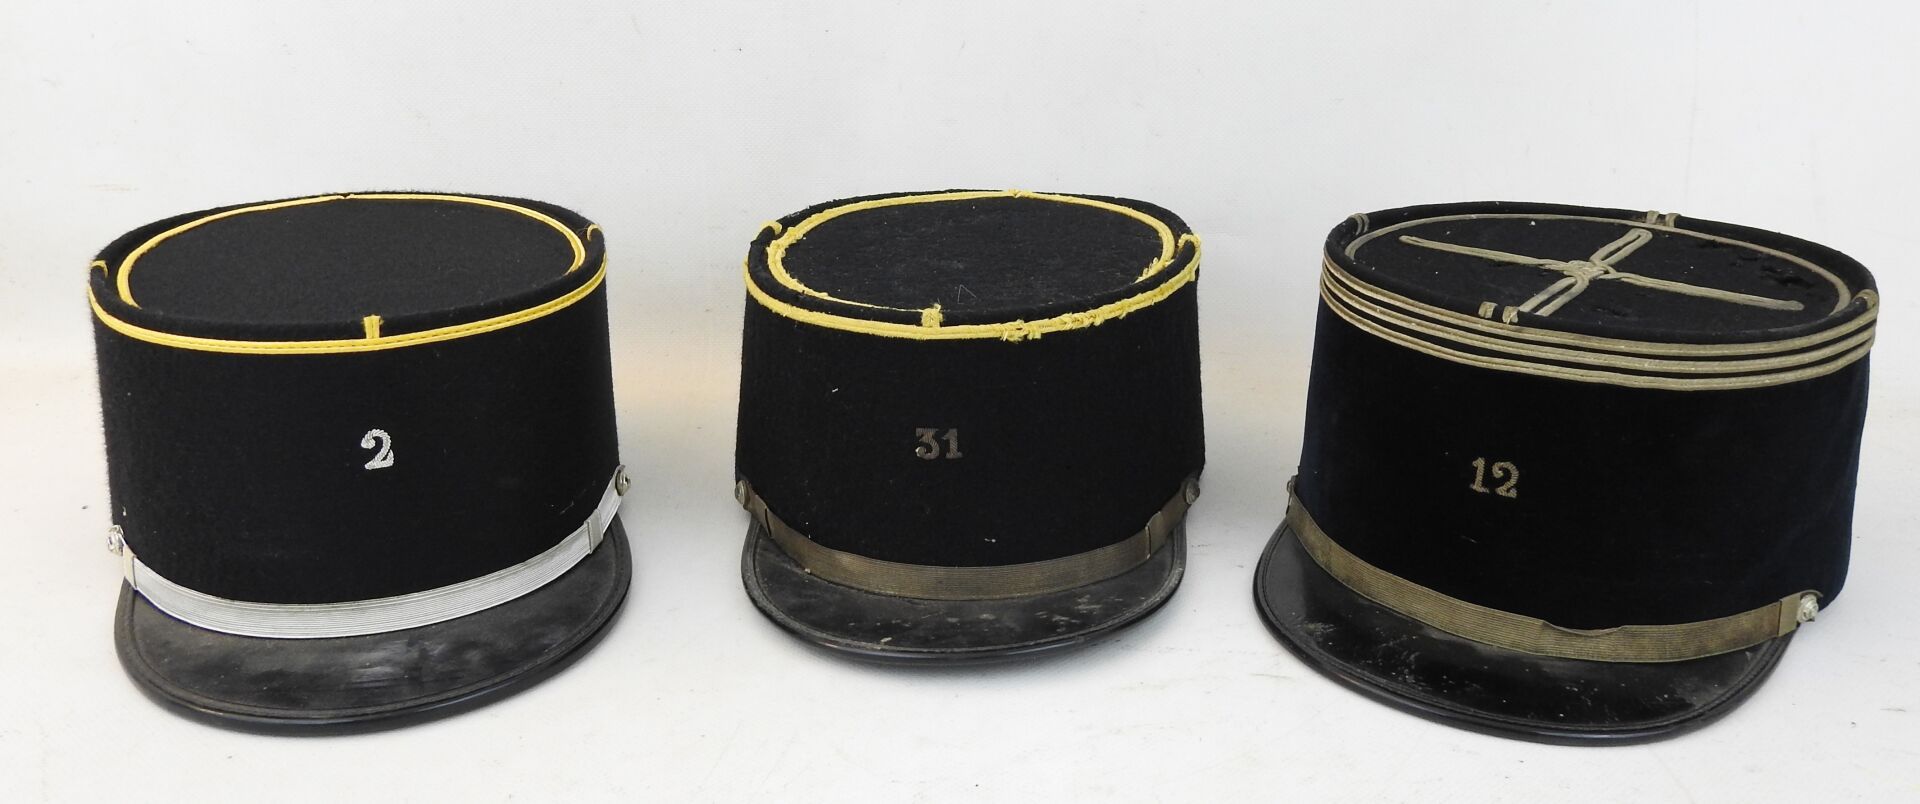 Null Suite of 3 kepi post 1945, captain 12th BCA, hunters of the 2nd and 31st BC&hellip;